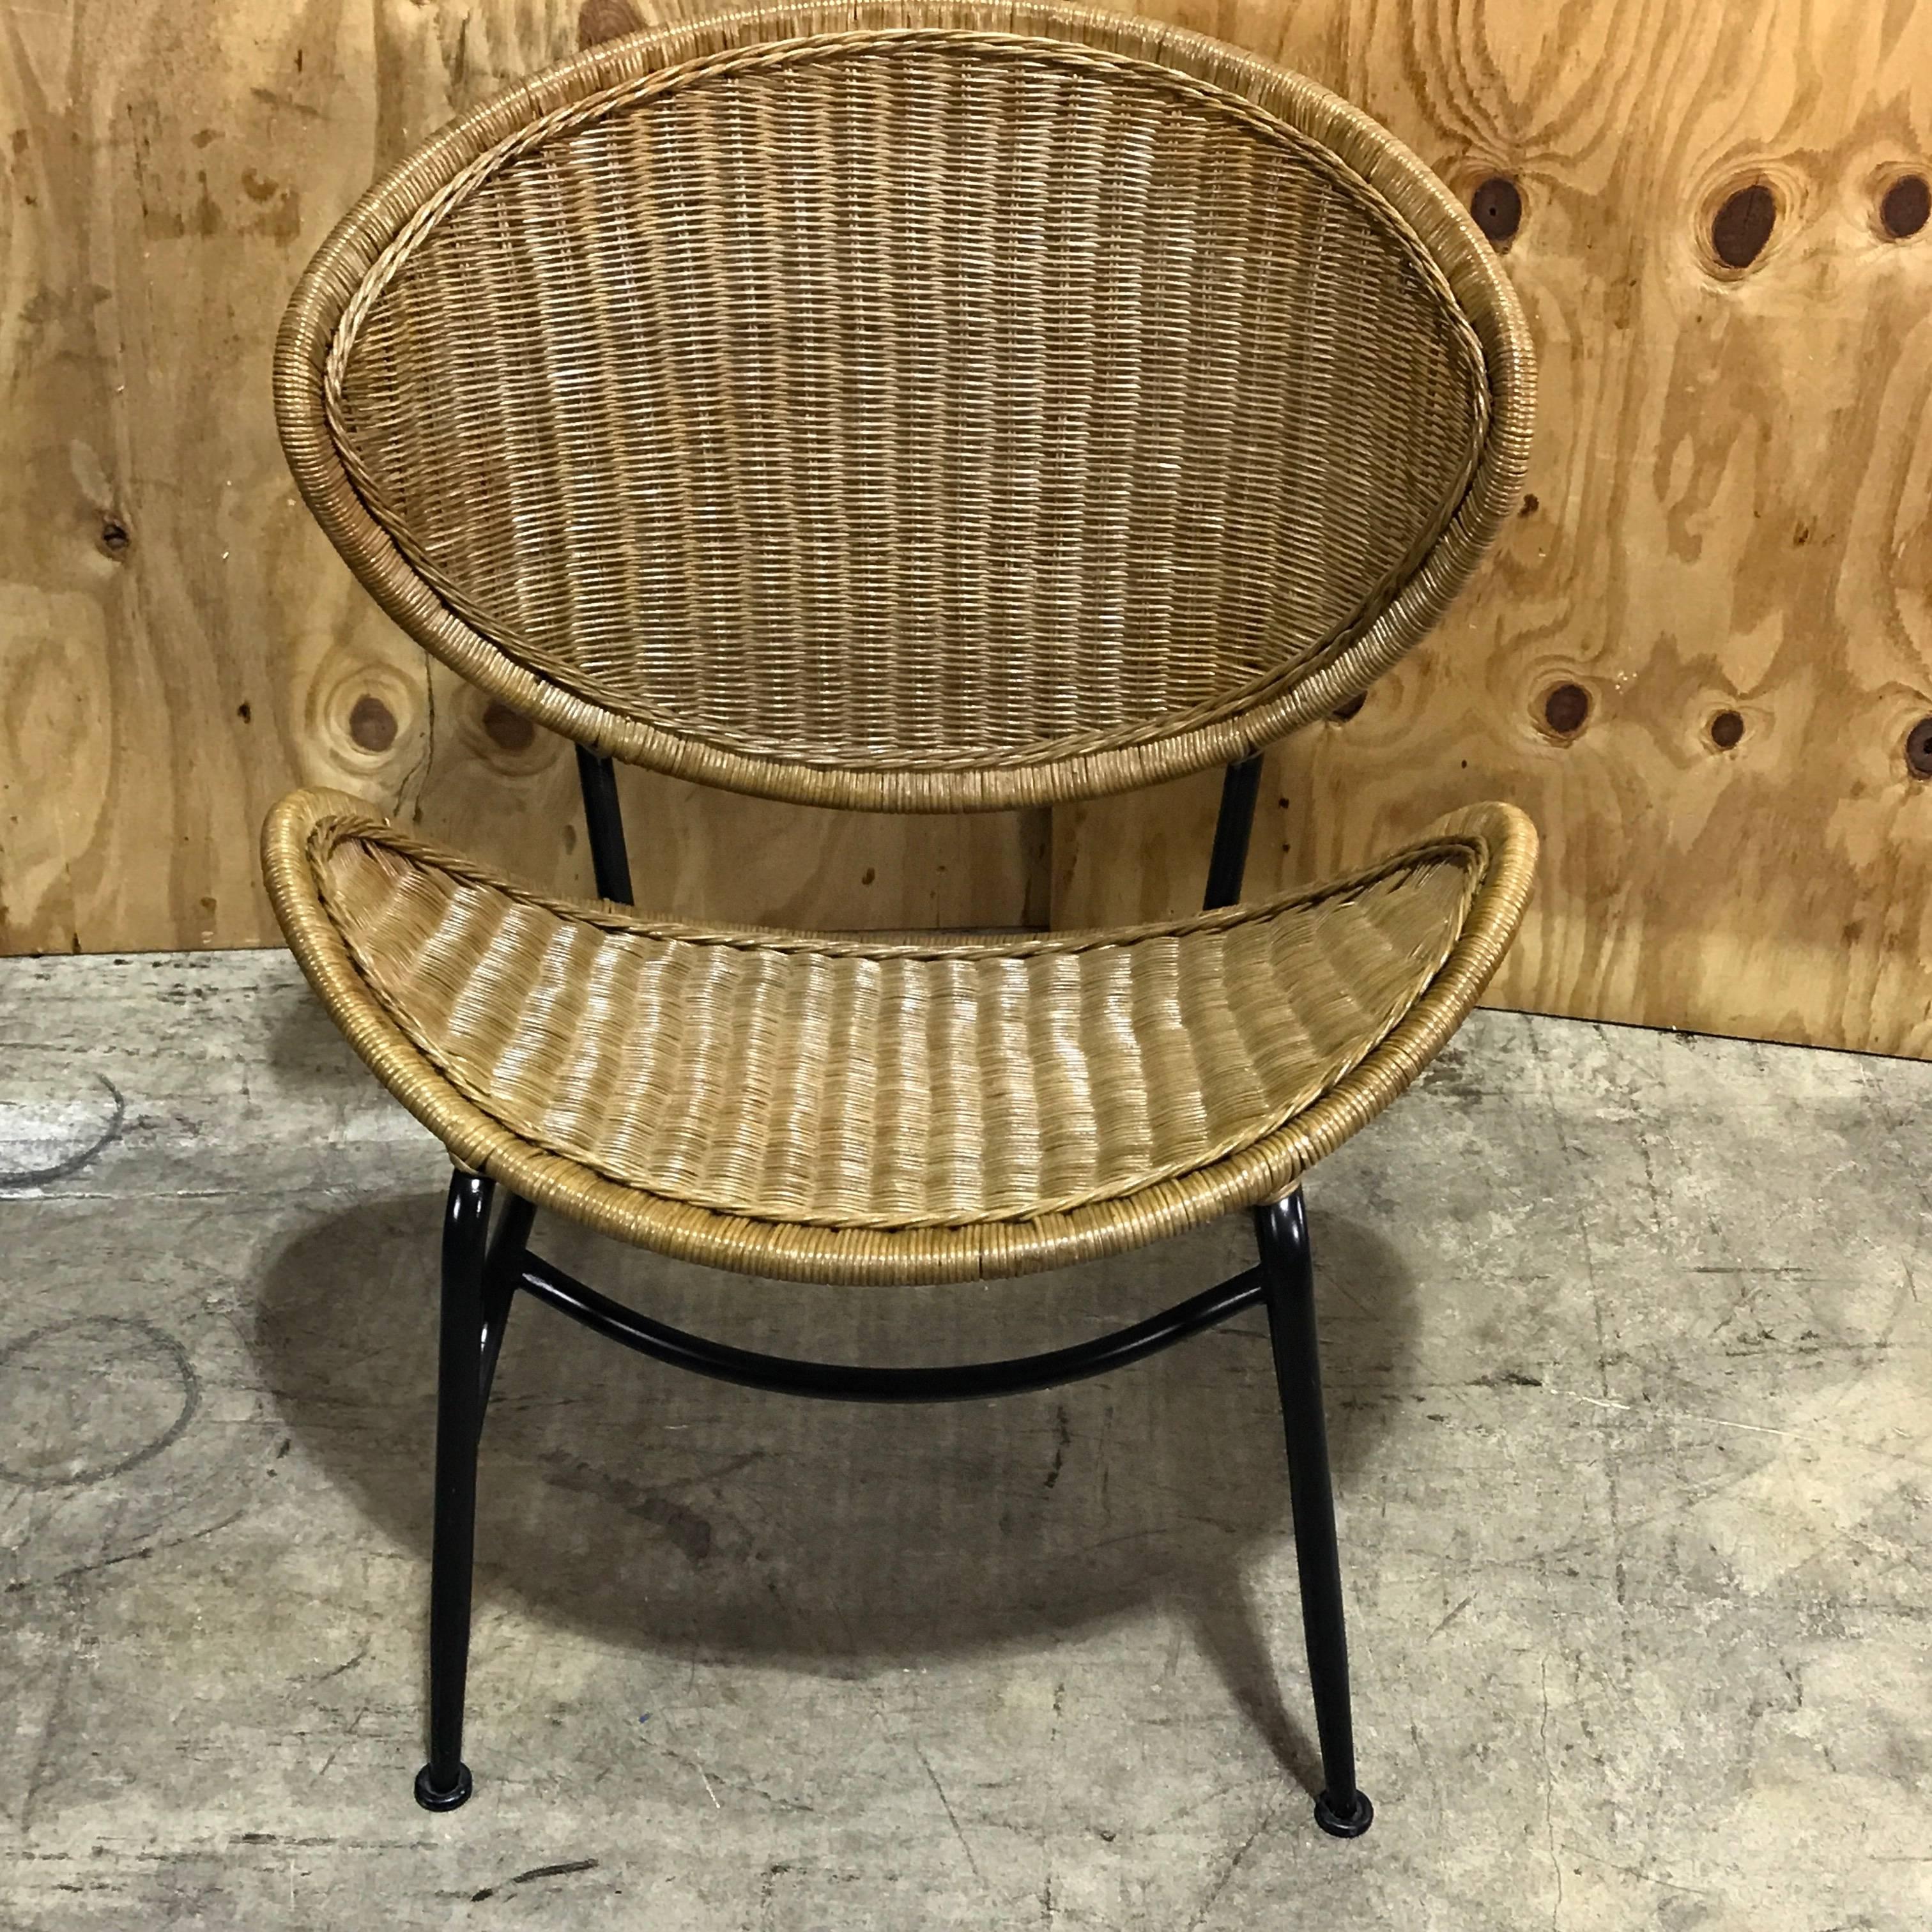 Pair of Midcentury Crescent Shaped Wicker Lounge Chairs, Restored 1